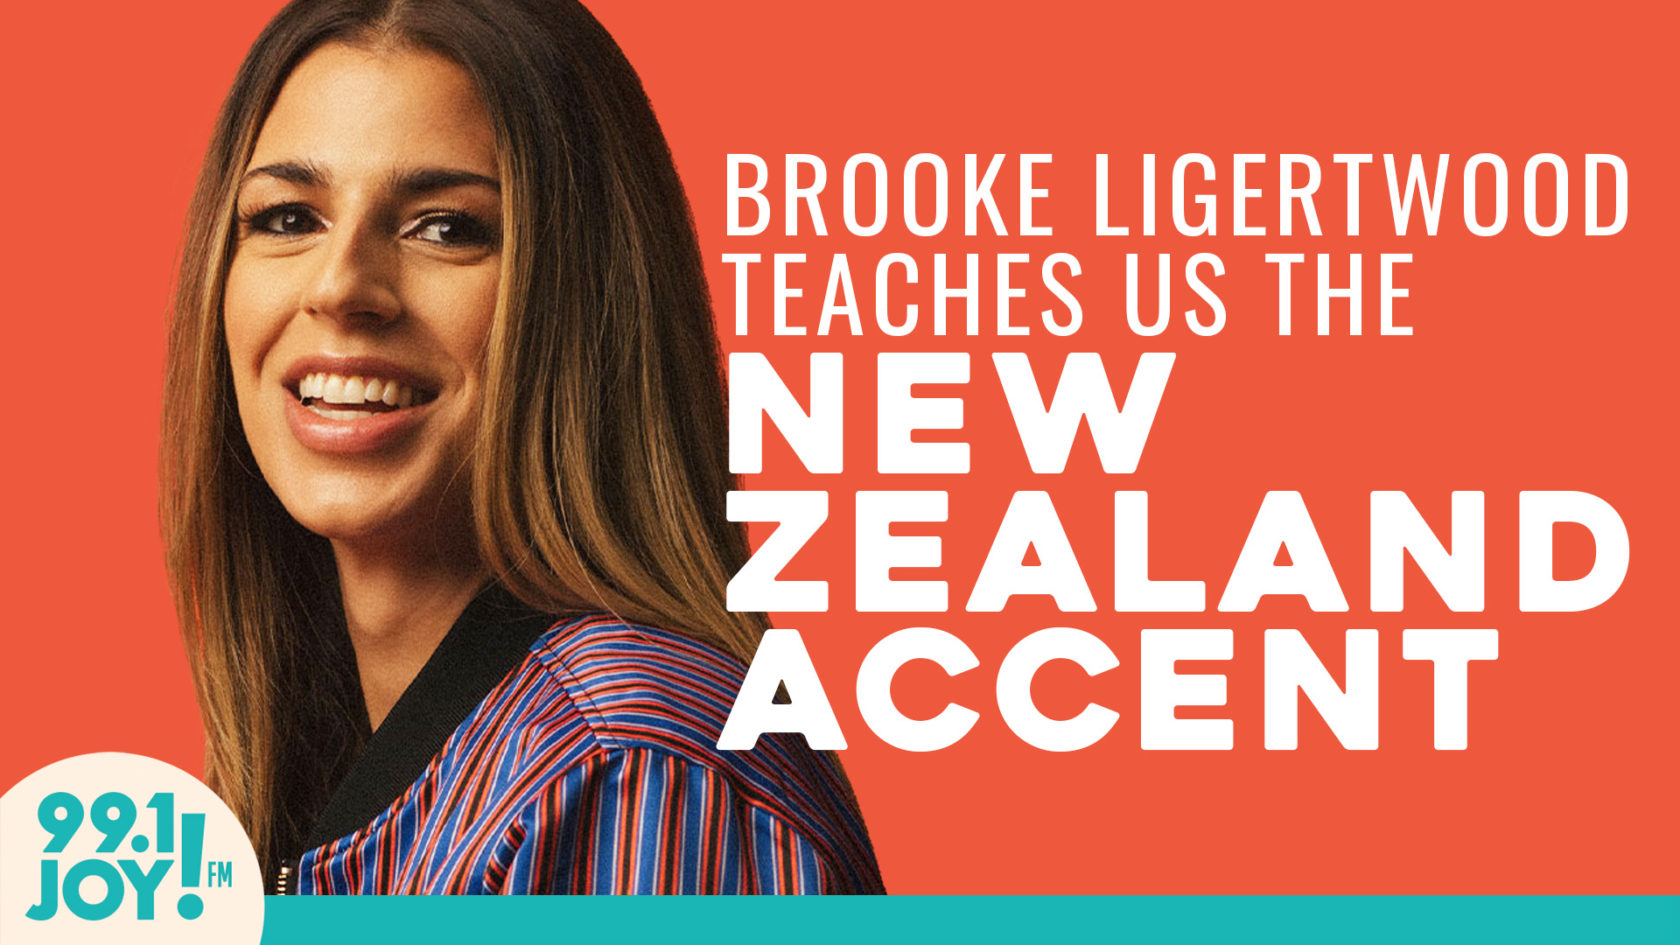 Brooke Ligertwood teaches Nick and Sandi the New Zealand Accent